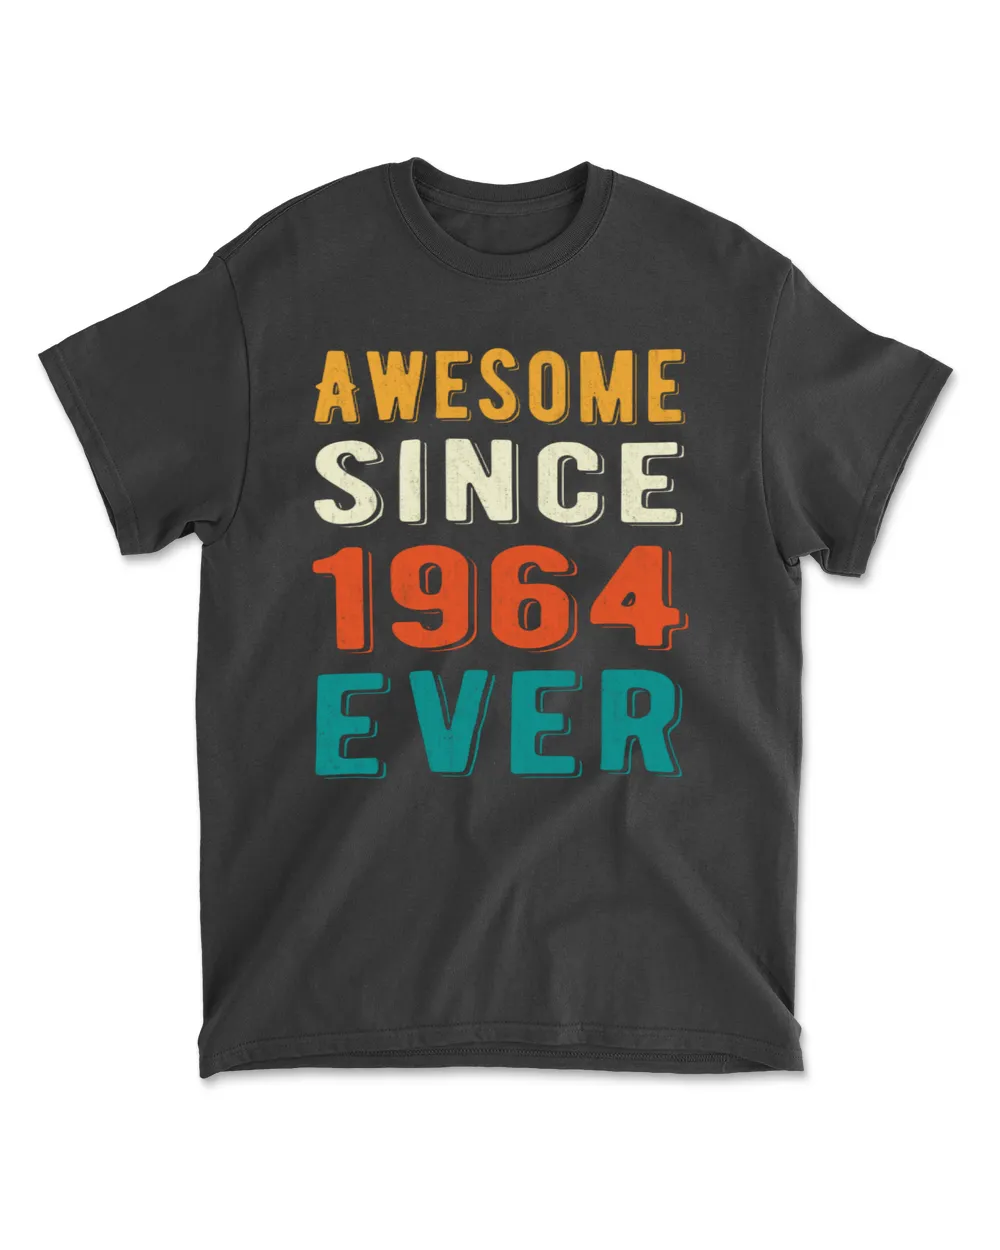 Awesome since 1964 ever Retro style 57th birthday gift